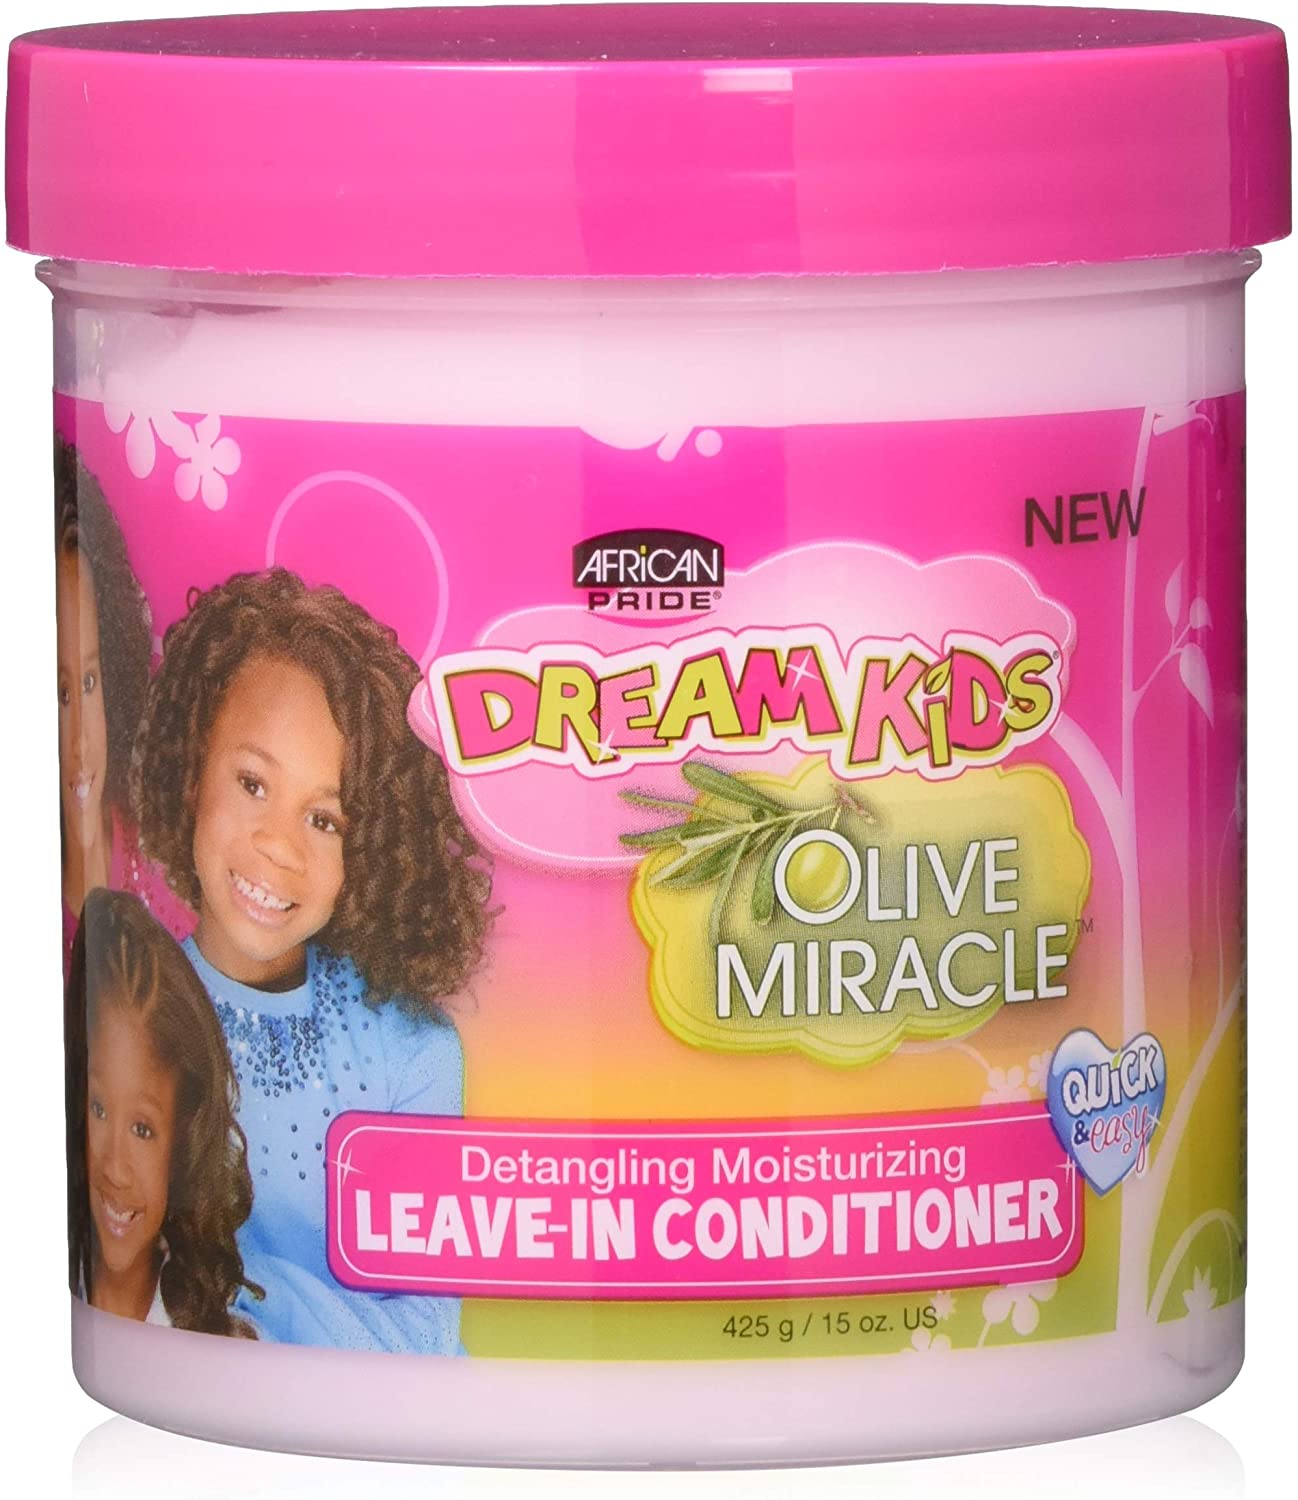 African Pride Dream Kids Olive Miracle Detangling Moisturizing Leave In Conditioner 15oz